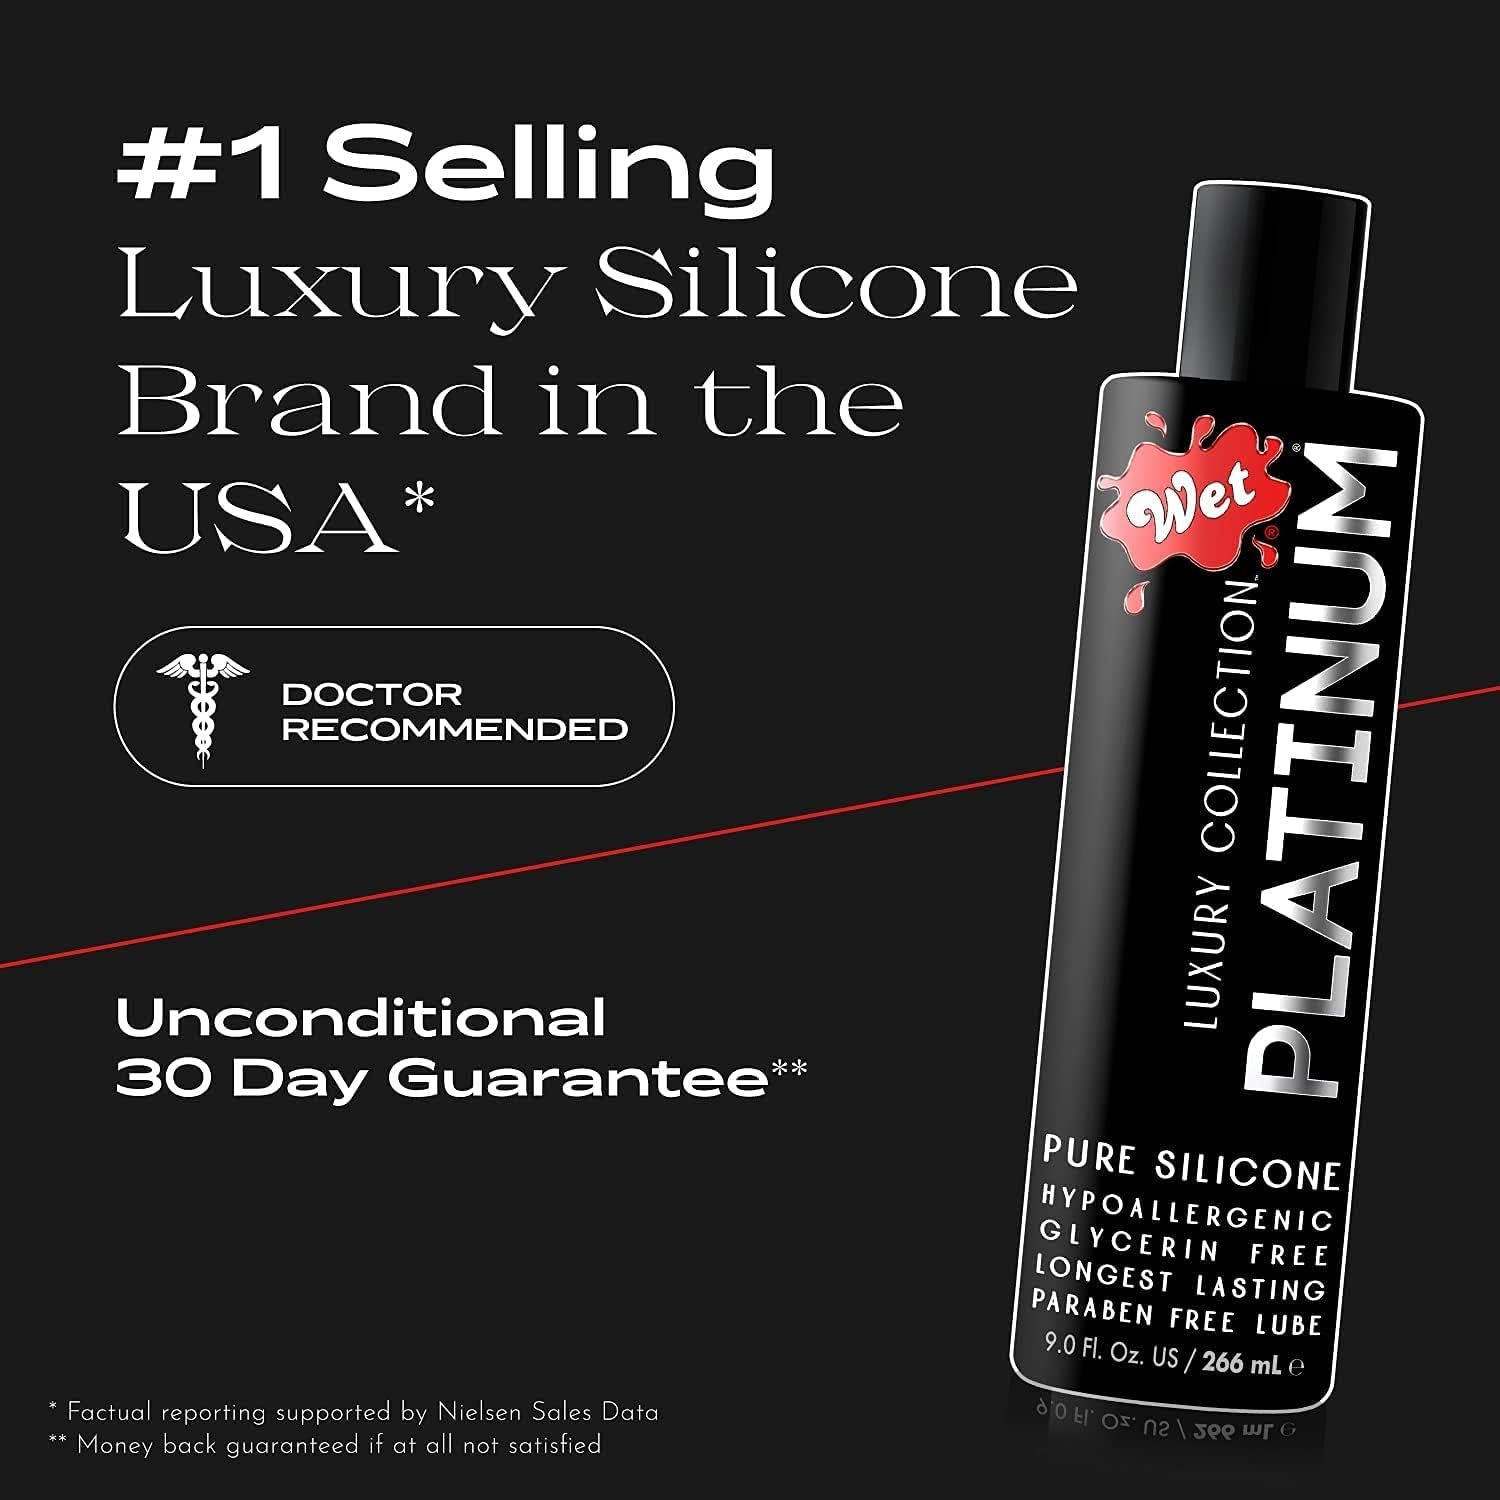 Wet Platinum Silicone Based Sex Lube 3 Sampler Premium Personal Luxury Lubricant for Men Women & Couples More Long Lasting Than Water Based Condom Safe Hypoallergenic Glycerin Paraben Free Intimacy